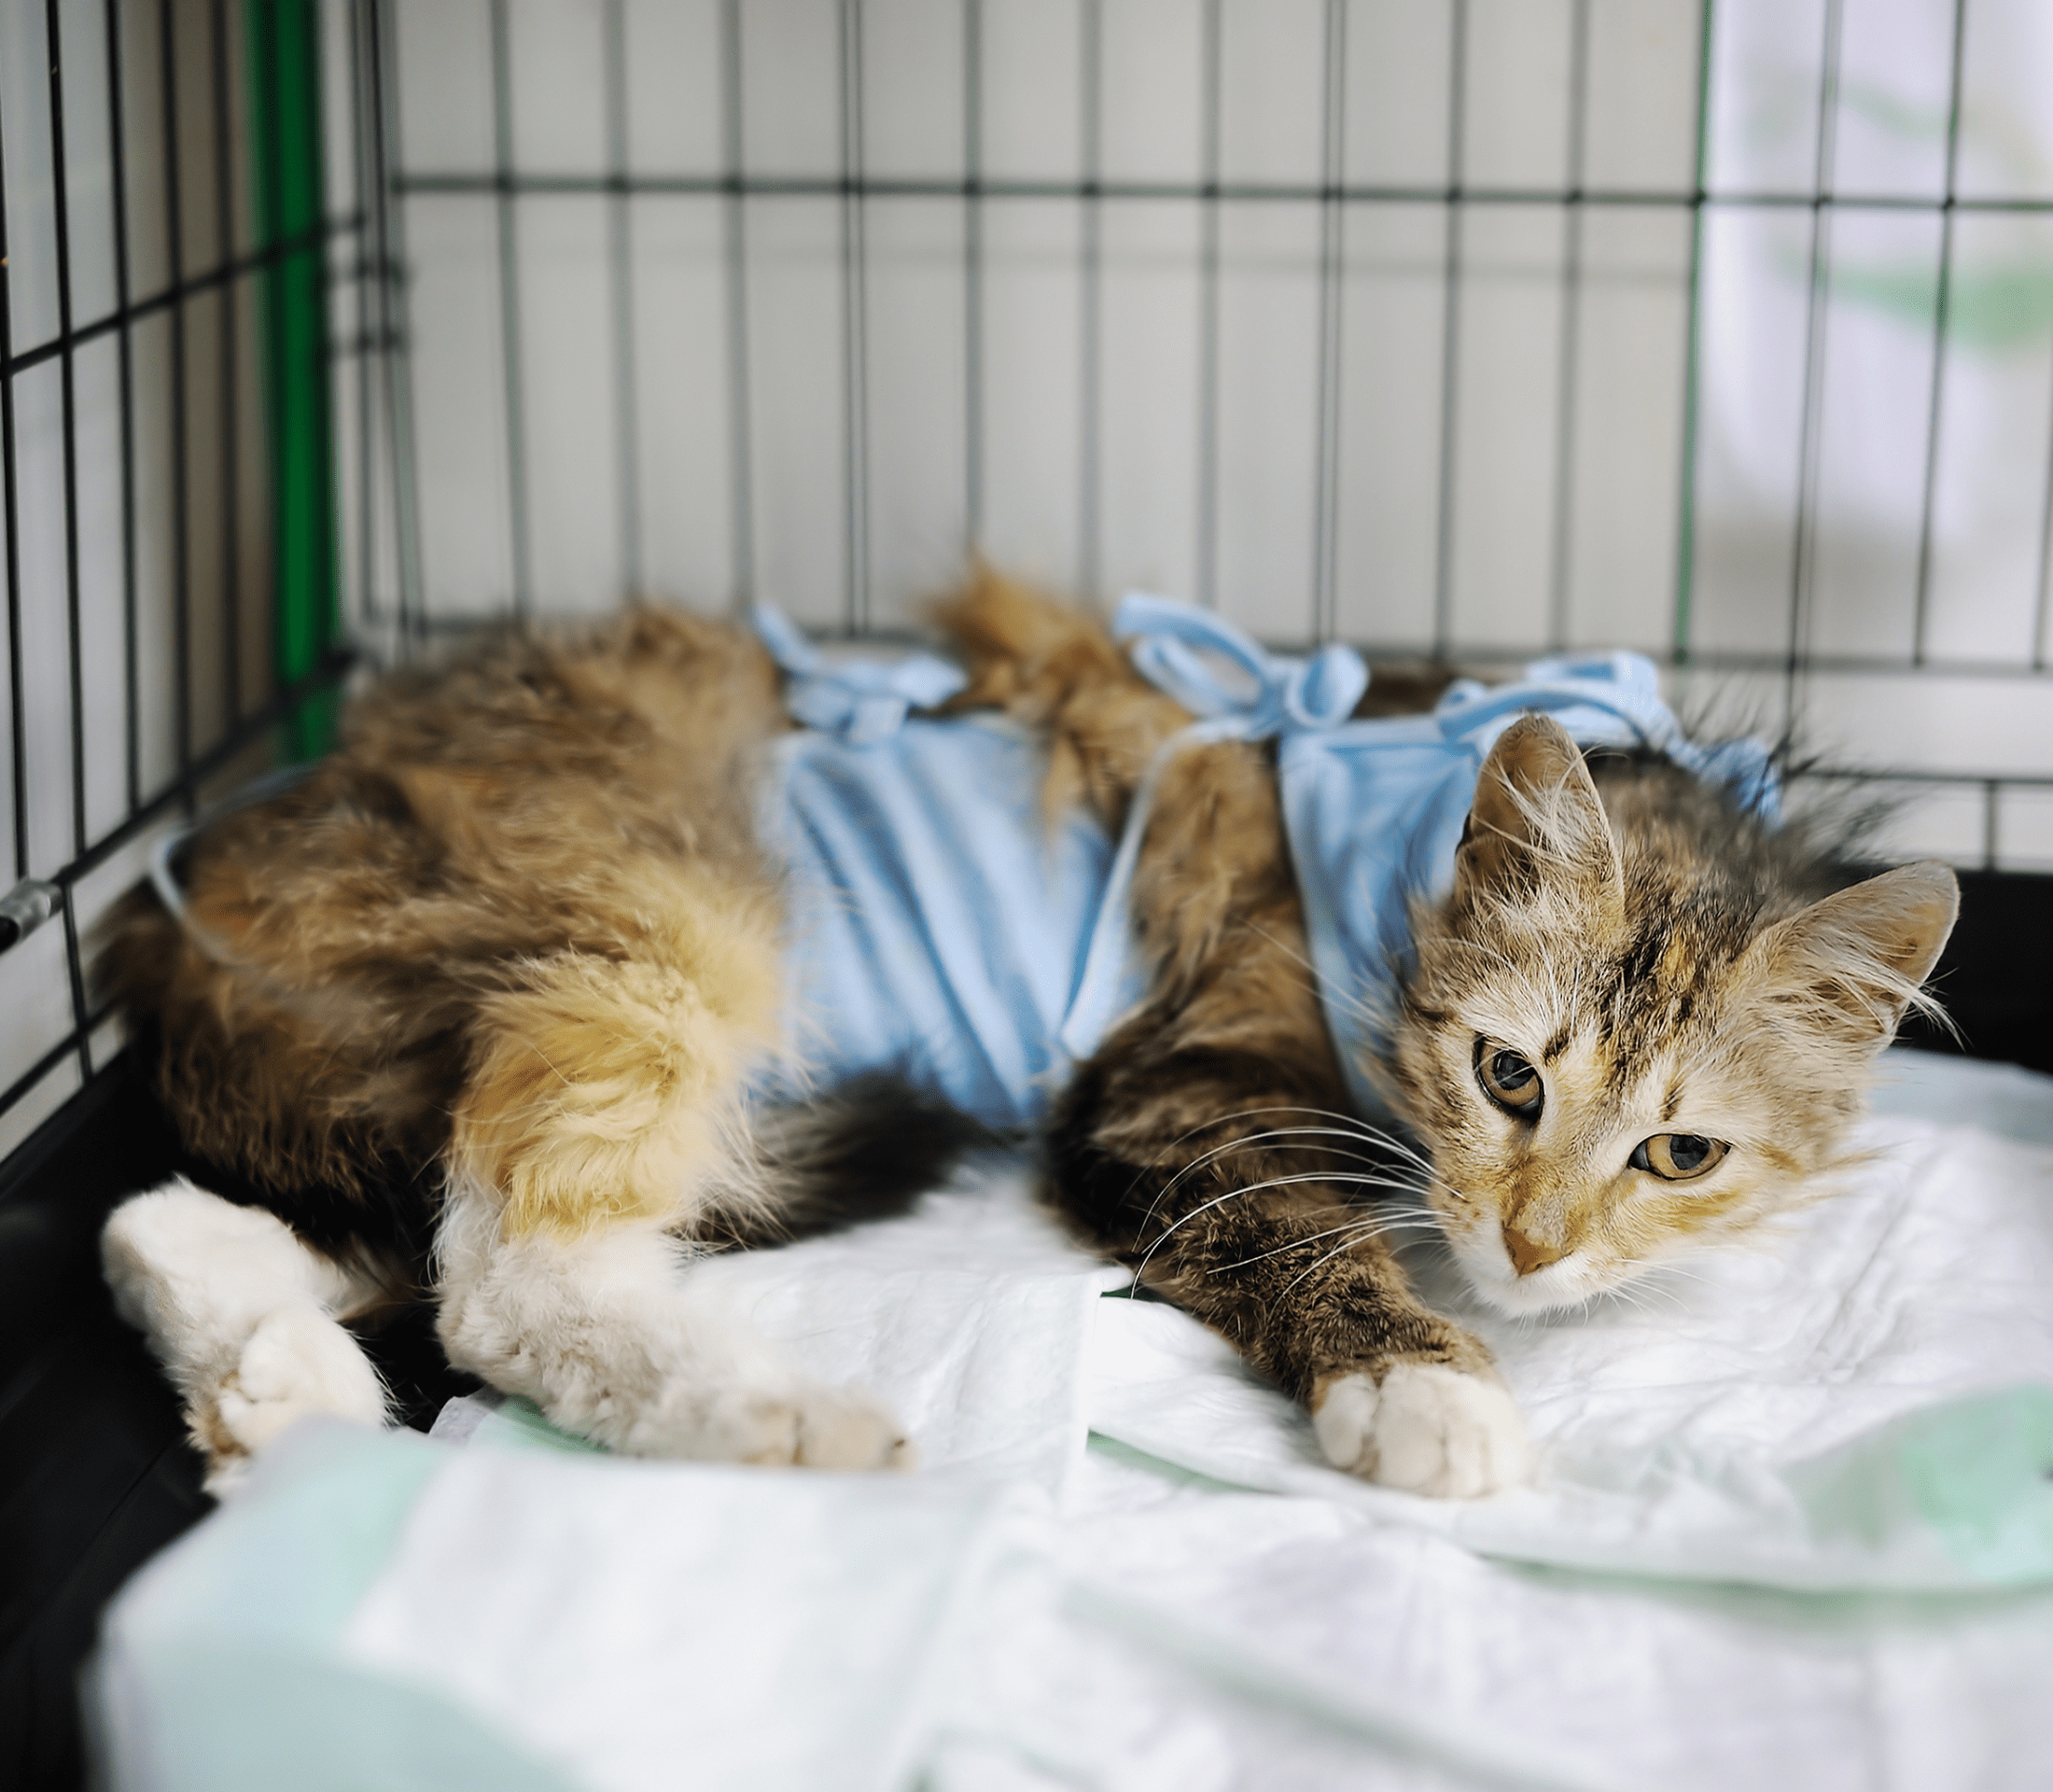 Brownish cat inside a cage with plasters on the body